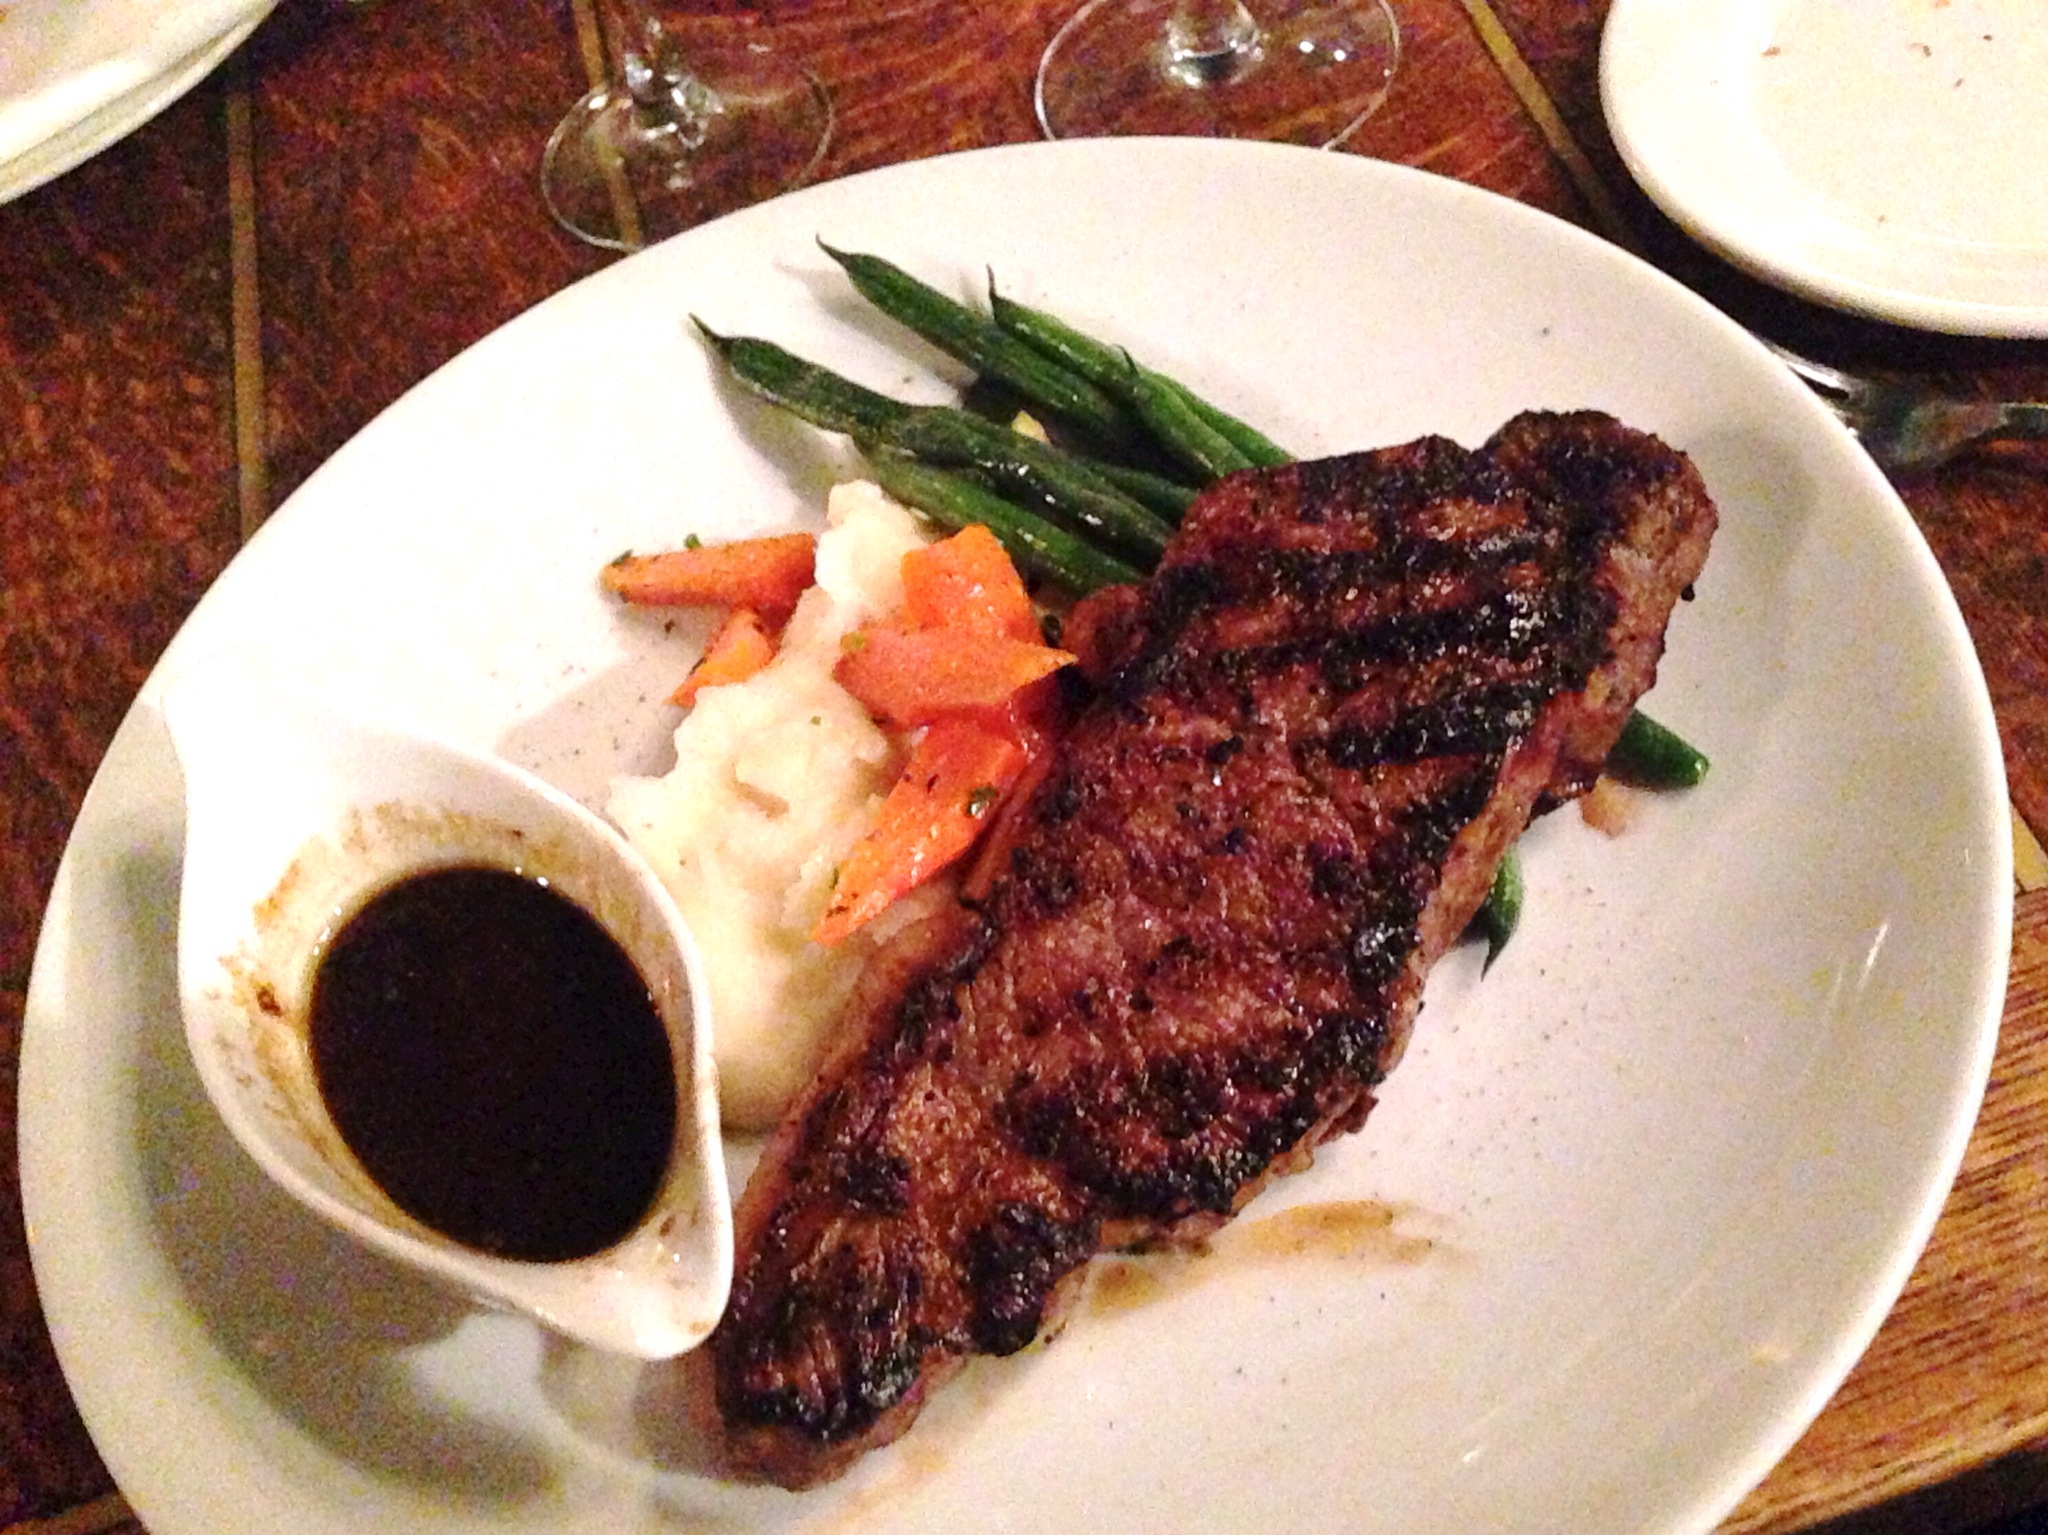 Grilled New York Strip with Brandy Peppercorn Sauce @ Hamilton Street Grill